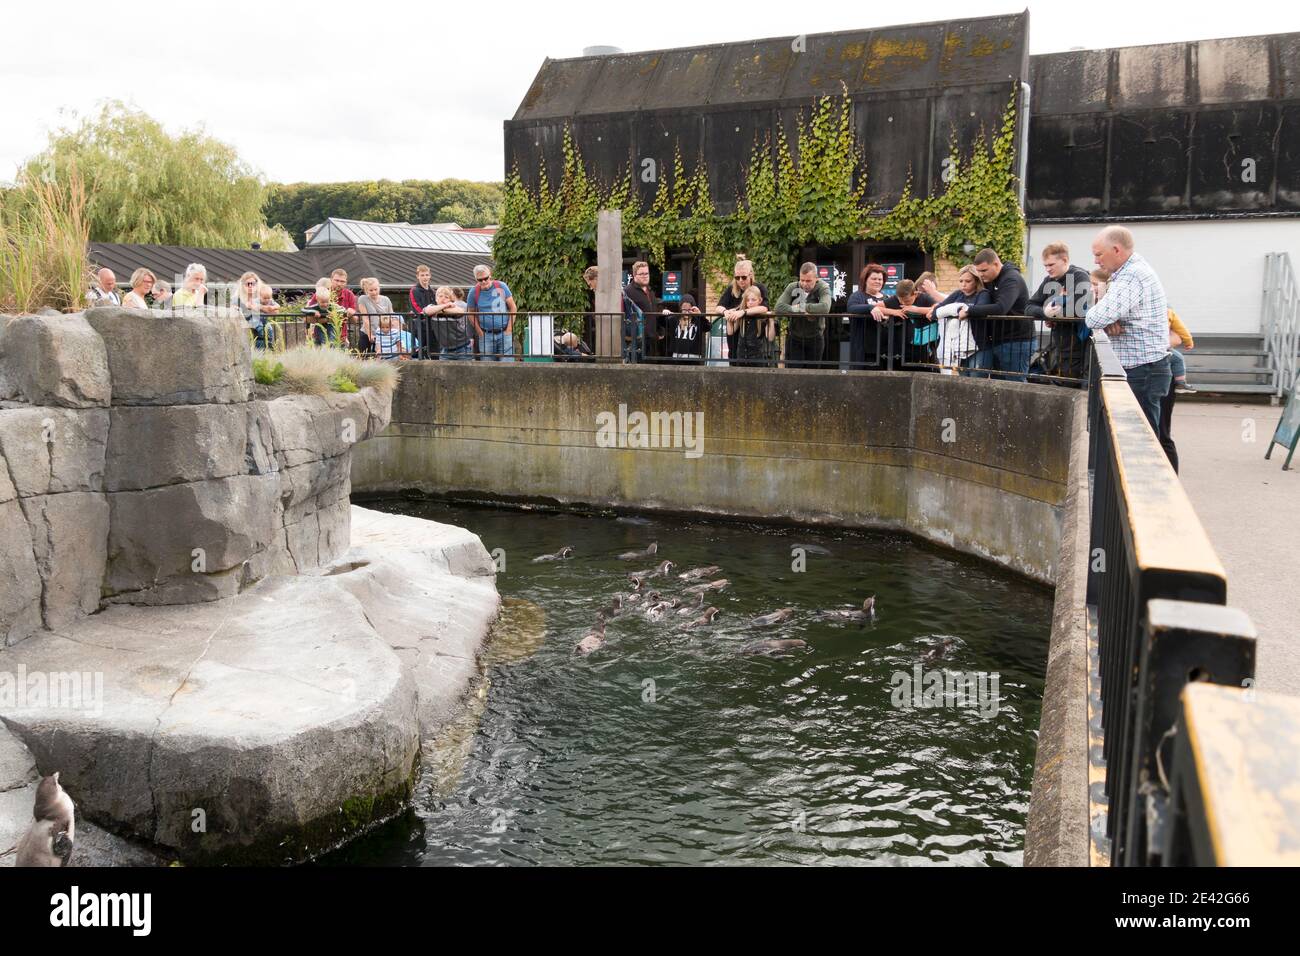 Aalborg, Denmark - 25 Jul 2020: People looking at Penguins swimming in green water Stock Photo